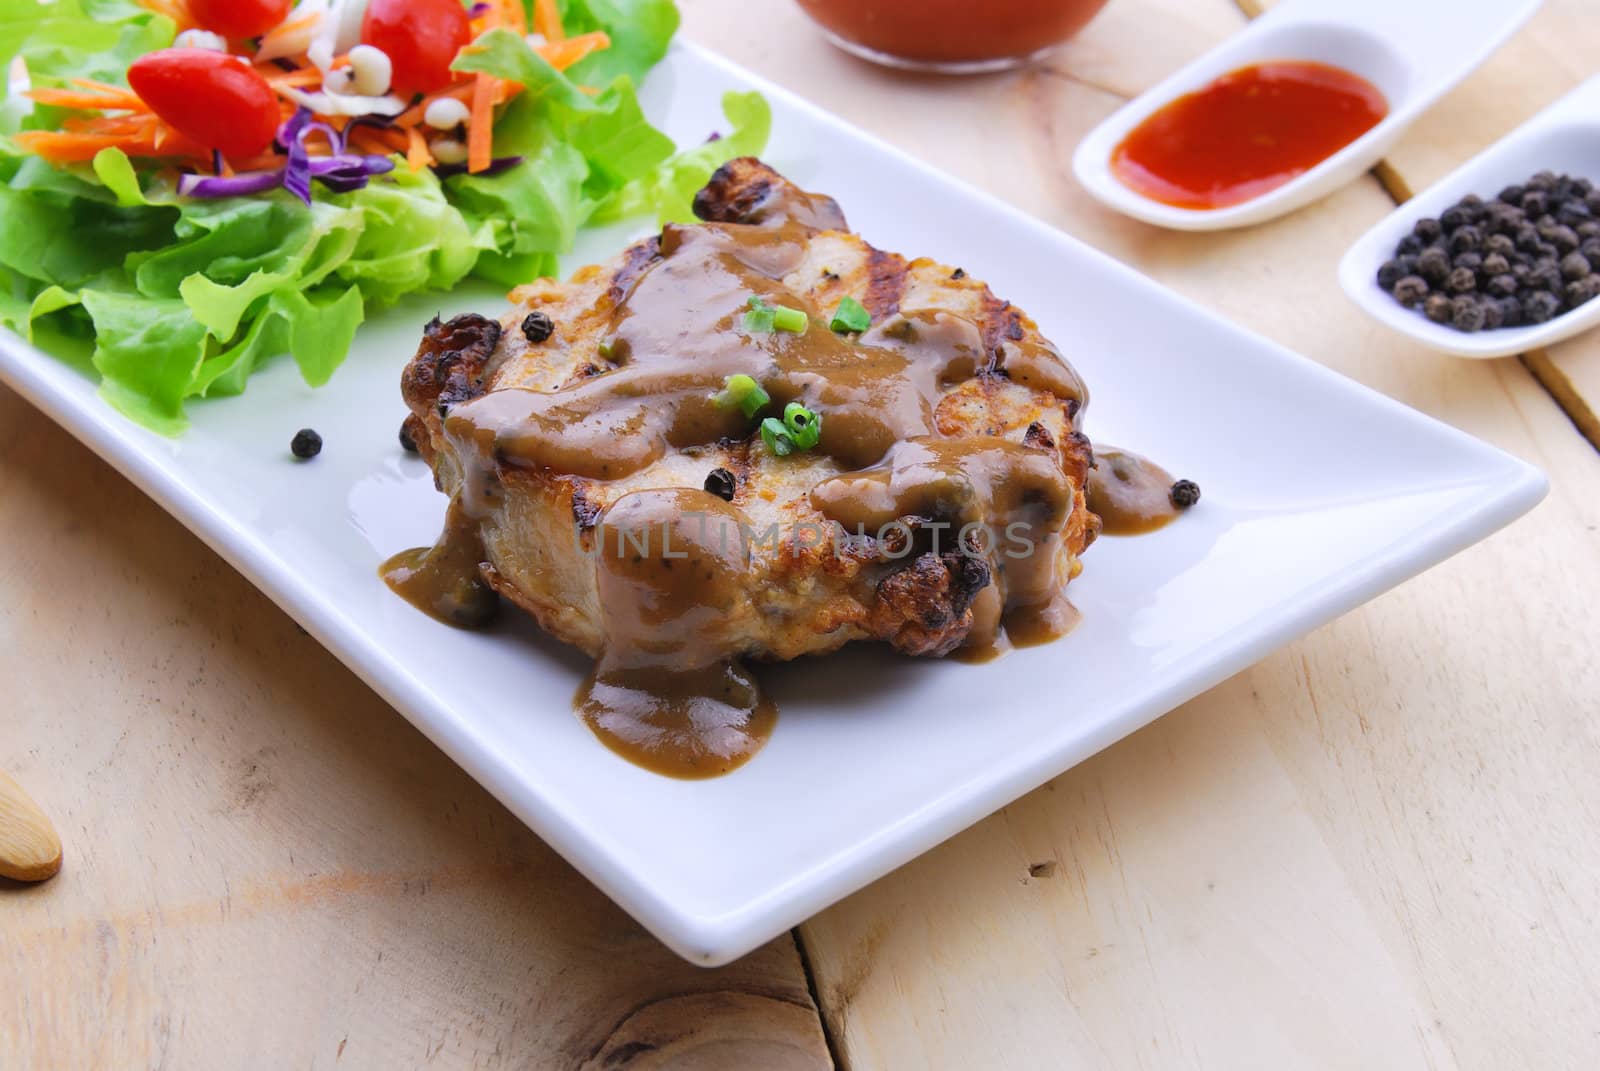 Grilled steaks, pork with pepper gravy and vegetable salad  by teen00000